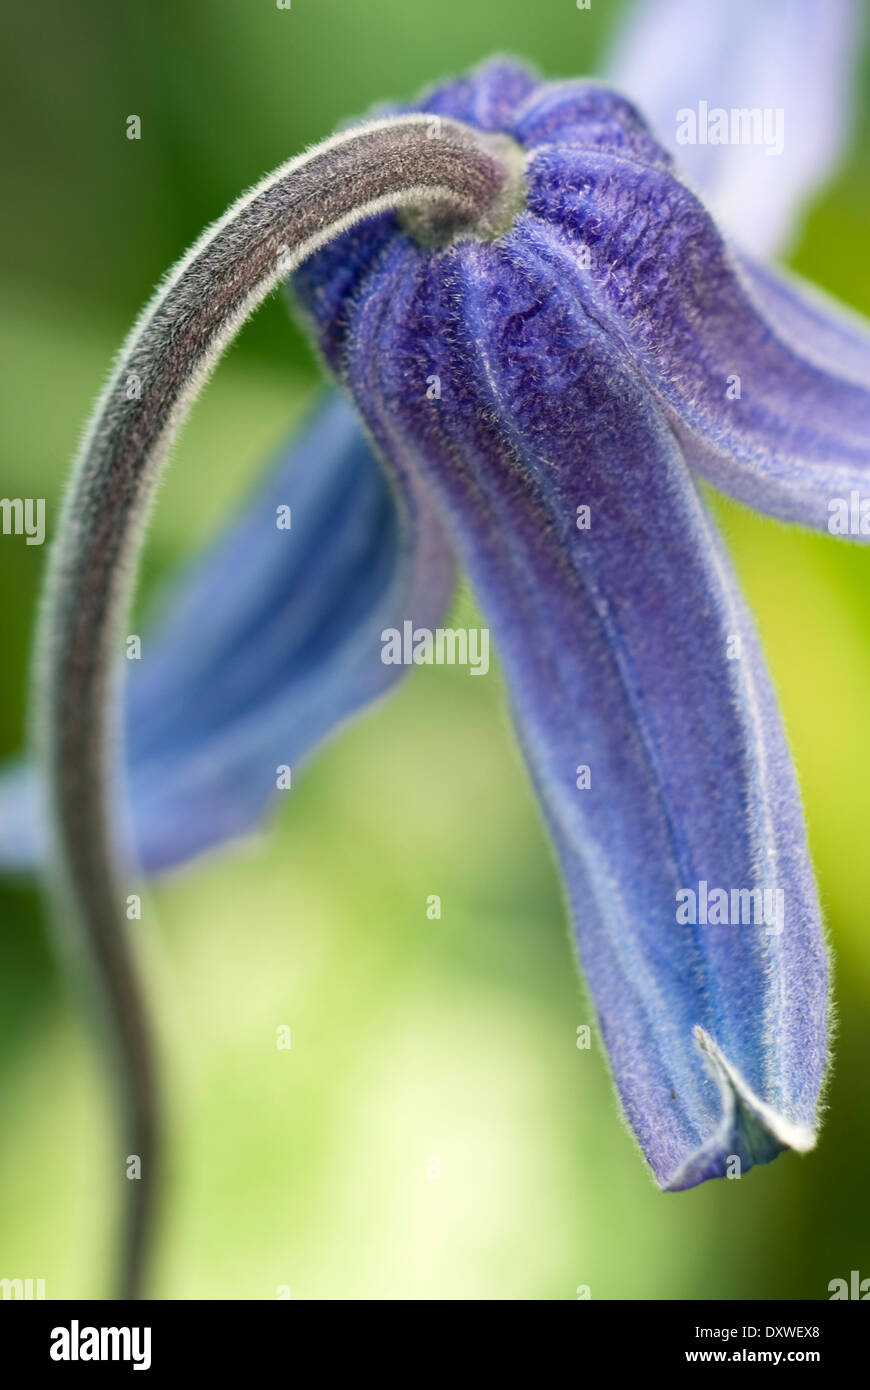 Clematis integrifolia, Clematis. Perennial, May. Portrait of blue bell shaped flower. Stock Photo